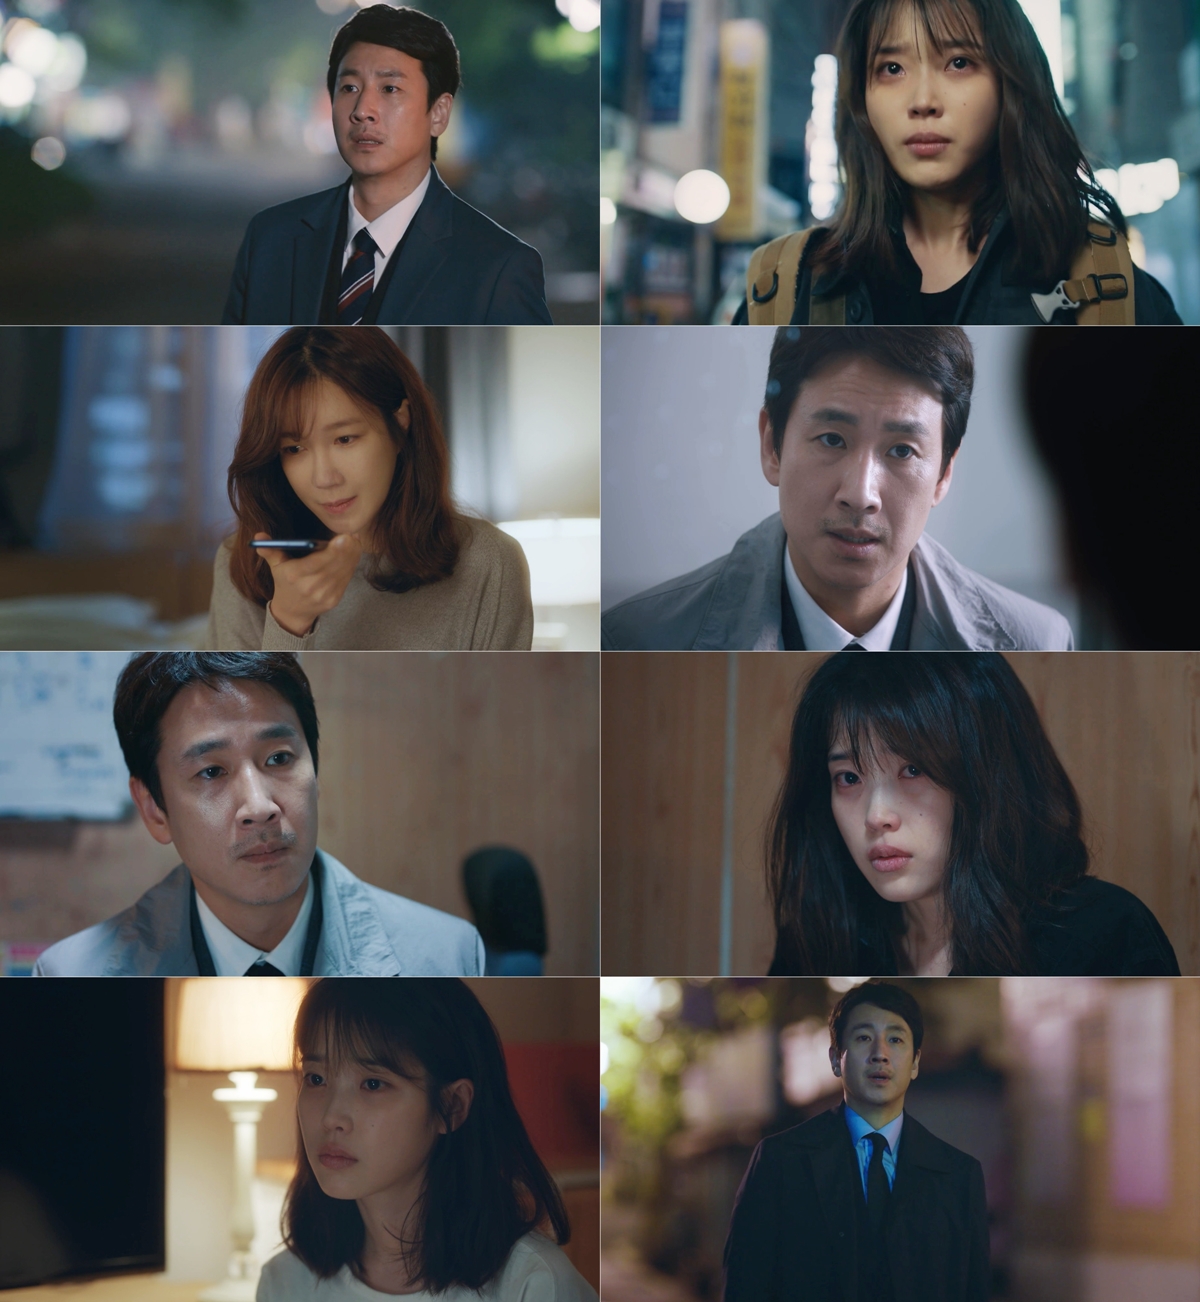 Dong-hoon (Lee Sun Gyun), who learned all the truths in the 15th TVN drama My Uncle (playplayed by Park Hae-young and directed by Kim Won-seok) broadcast on the 16th, was eager to return Jian (IU) who had disappeared.Donghun said to his cell phone, IJian, give me a call. I heard you. You know youre listening to me. Its okay. Give me a call.He found the number that started with 02 from Jian and pressed the call button, but the answer was a machine sound called unreceiveable number.Donghoon realized that Jian called from Payphone and ran there.Jian, who learned that Donghoon knew about the wiretapping and that he was coming to his place by tracking the Payphone number, ran away with only one backpack.Dong-hoon, who returned home without finding Jian, talked about Yun Hee (Lee Ji-ah) and Jian, so Yun Hee confessed that he knew through Do Joon-young (Kim Young-min).Yun Hee also went out with Donghun to find Jian.Jian, who had been in a light contact while rushing away, visited the cleaning grandfather Chun Bae (Lee Young-seok), and he contacted Dong Hoon.Jian was suddenly caught up in Donghun, but I did not know what to do with guilt. But You thought you killed people? Did you do everything?So whos gonna be good to you more than four times? Youre stupid, youre good to anyone. So Ill live with it. Nevertheless, Donghun thanked Jian, who was the only one to be on his side. Its nothing. Its embarrassing, its life ruined.I can live happily. I will not be broken. I will be happy. Jian, who realized his heart, also cried, saying, I really wanted you to be happy. Dong-hoon then took Jian to visit Elf Princess Rane (Onara); asked for Jian, who had nowhere to go, and Elf Princess Rane was also welcomed.Jian told Elf Princess Rane, I want to be born in this neighborhood when I am born again, and Donghoon, who was heading home at the same time, said, Lets be happy.The two people who shared their hearts made the audience feel uncomfortable.The 15th episode of My Uncle was broadcast on the same day with an average of 5.8% and a maximum of 6.8%, ranking first in the same time zone of cable and general.